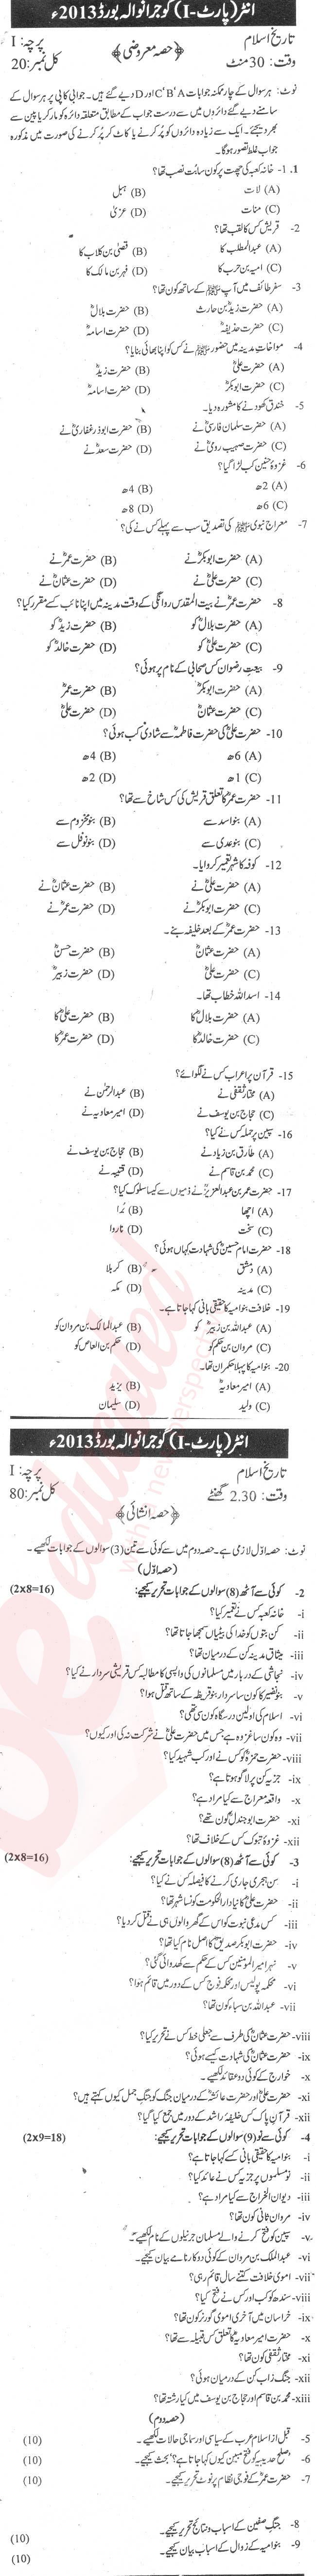 Islamic History FA Part 1 Past Paper Group 1 BISE Gujranwala 2013